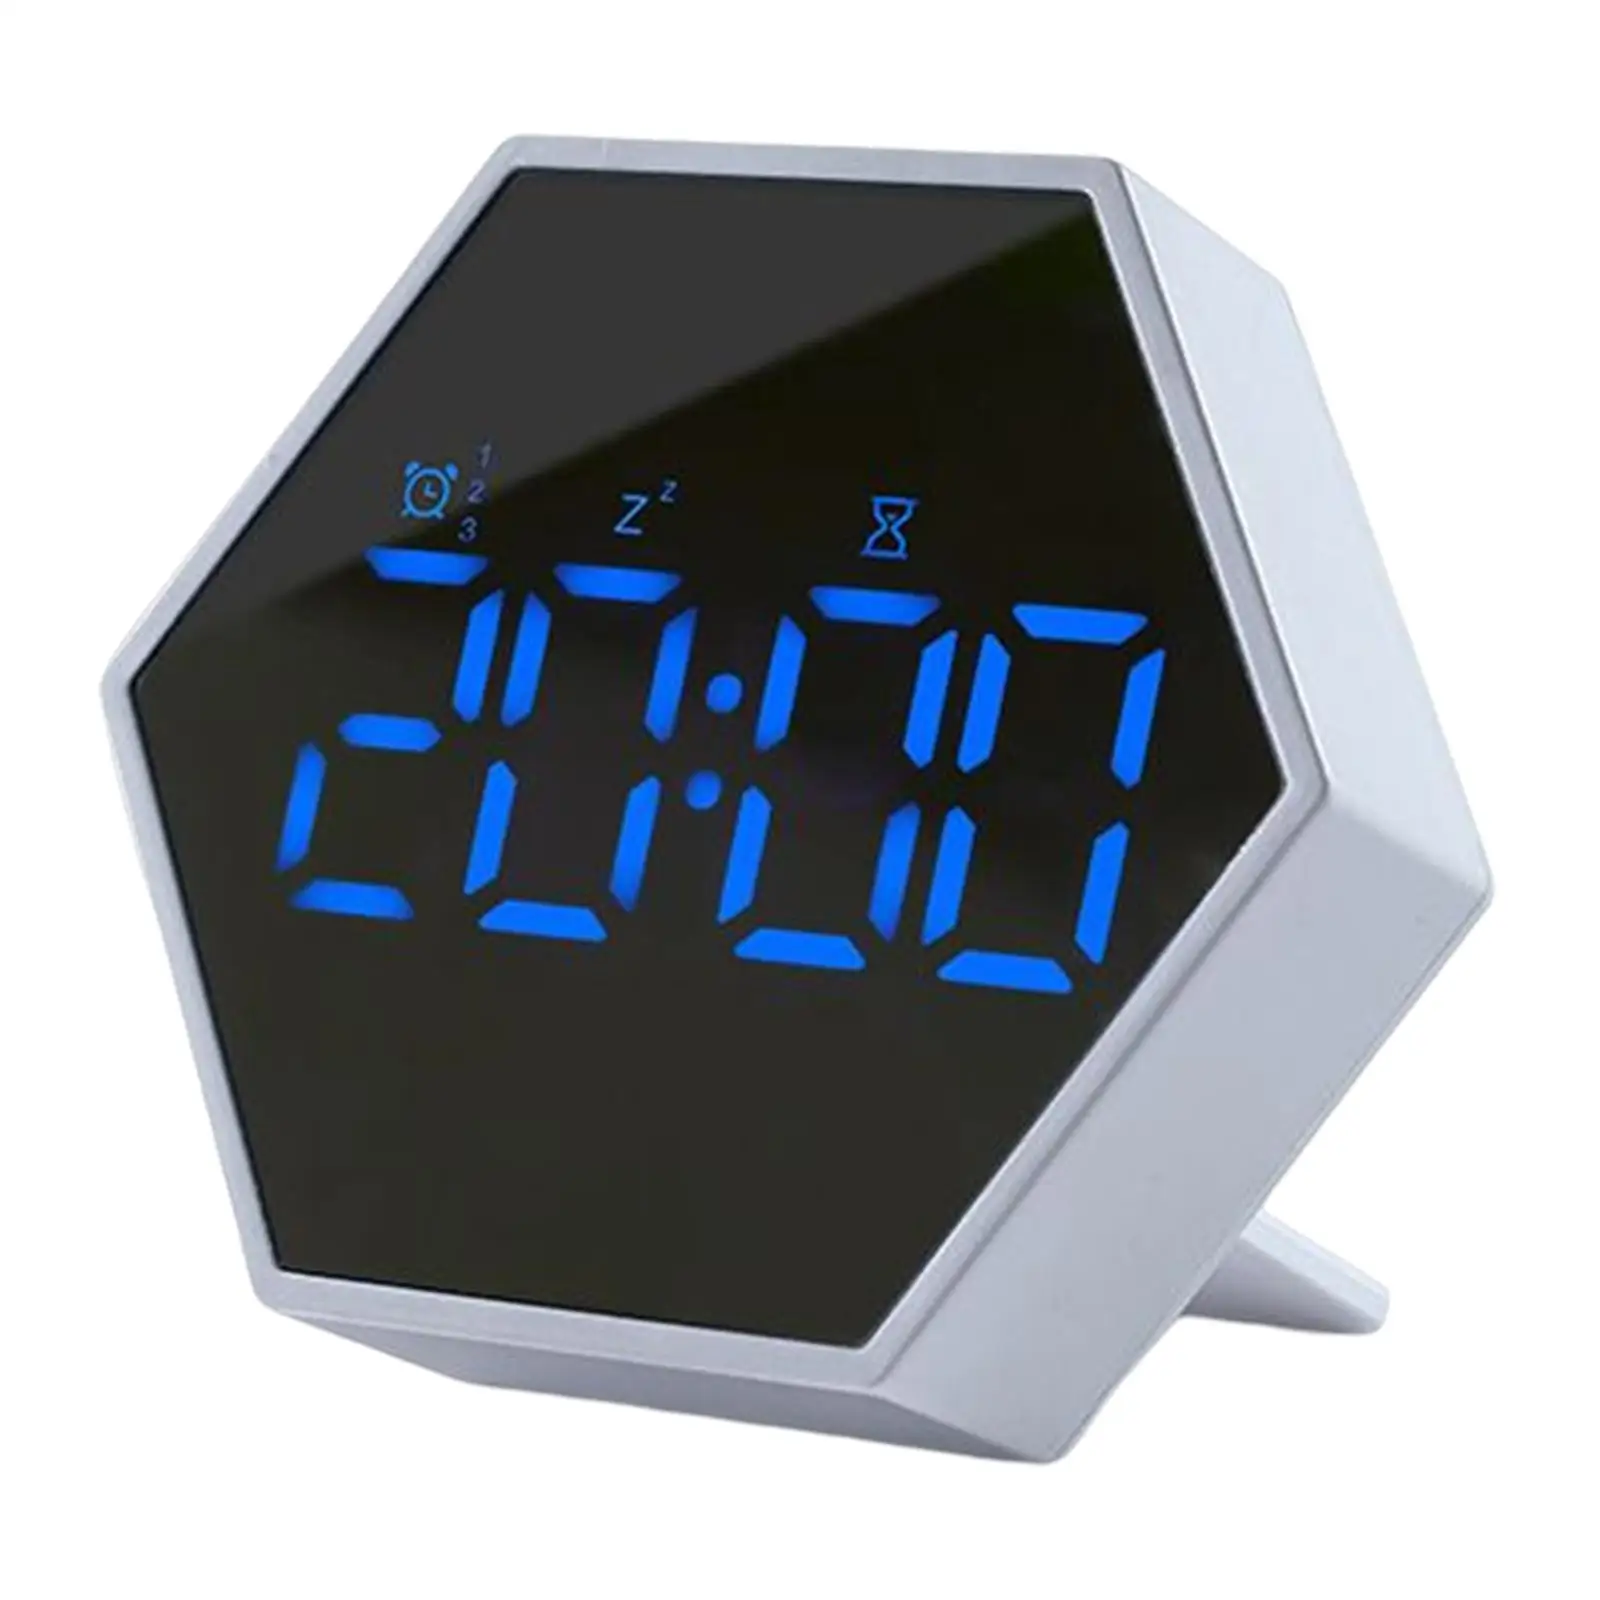 Alarm Clock LED Display Wall Clock Snooze Function Battery Powered Adjustable USB for Living Room Home Bedside Office Kitchen